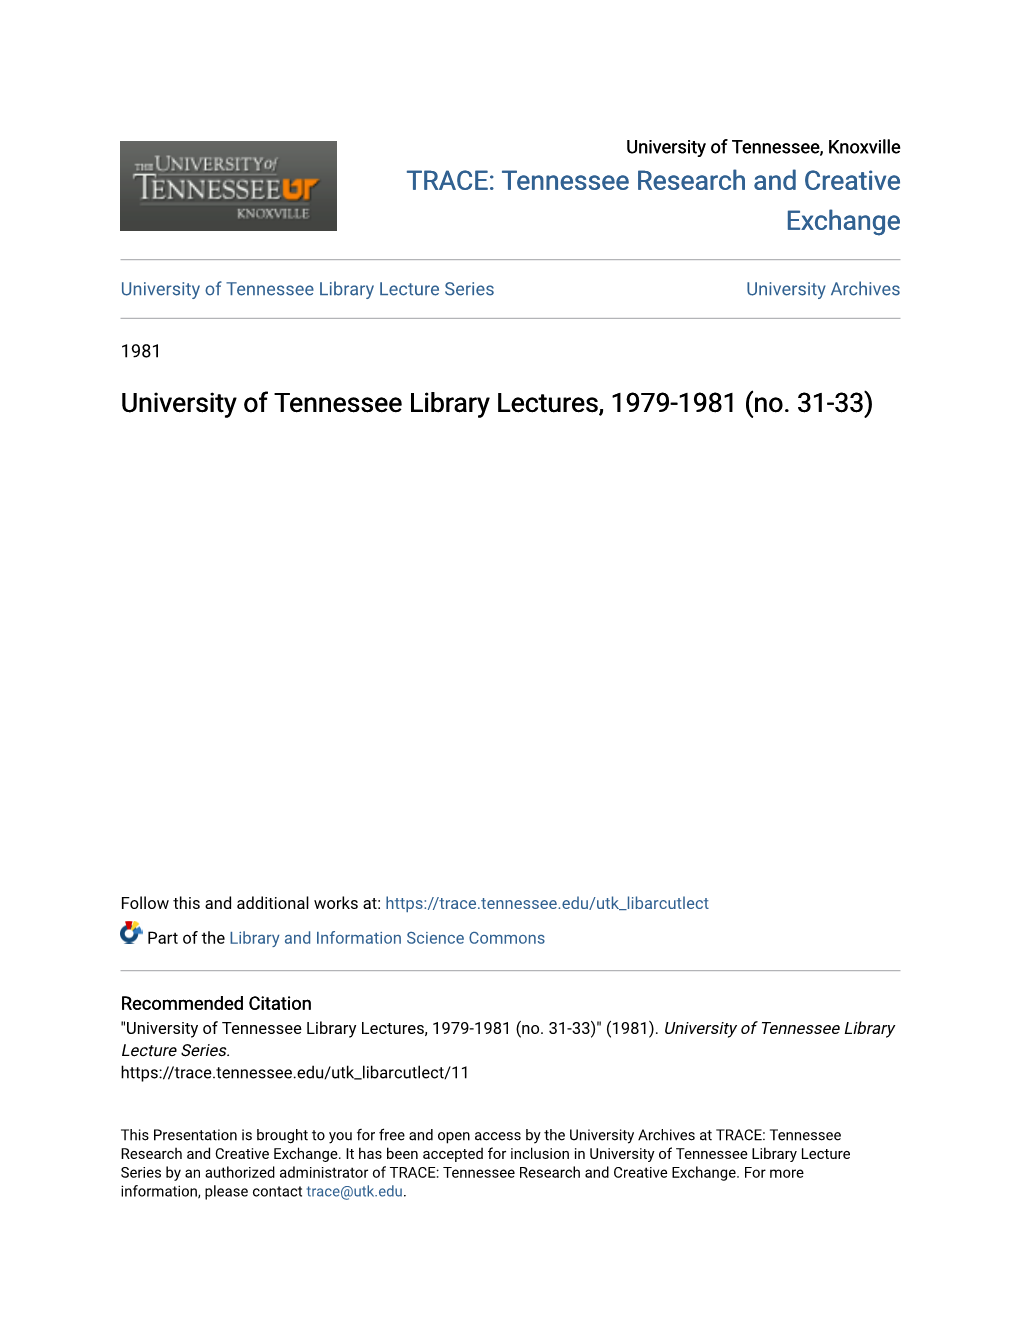 University of Tennessee Library Lectures, 1979-1981 (No. 31-33)